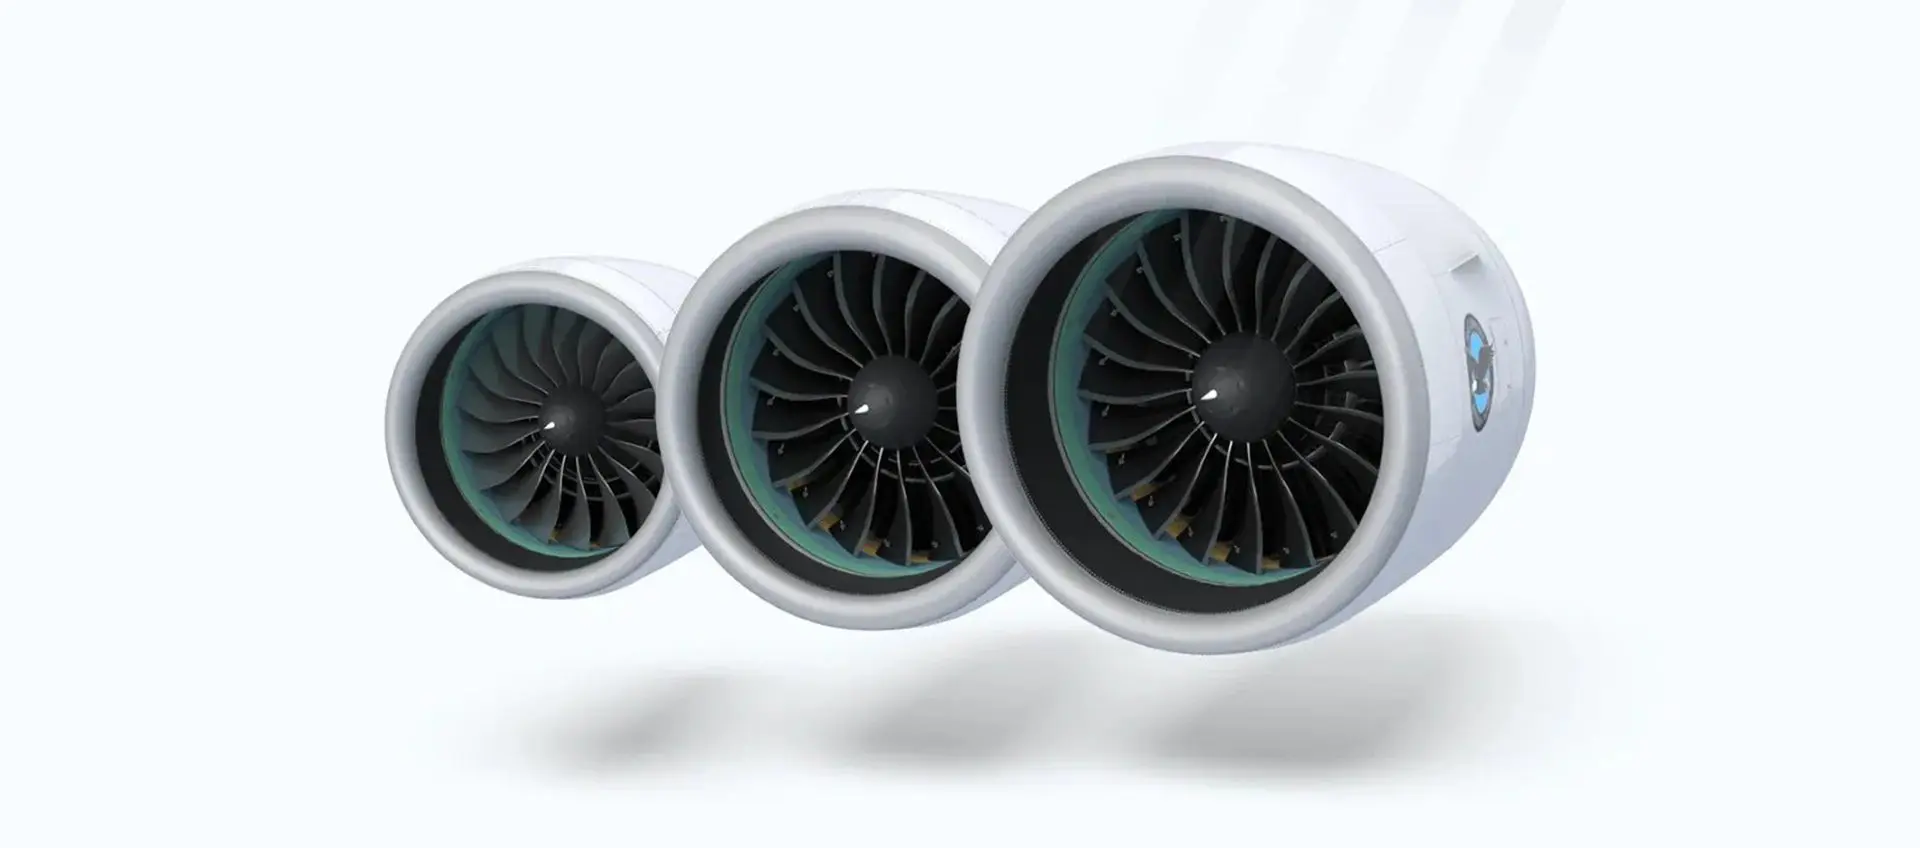 Three jet engines are shown in a row.